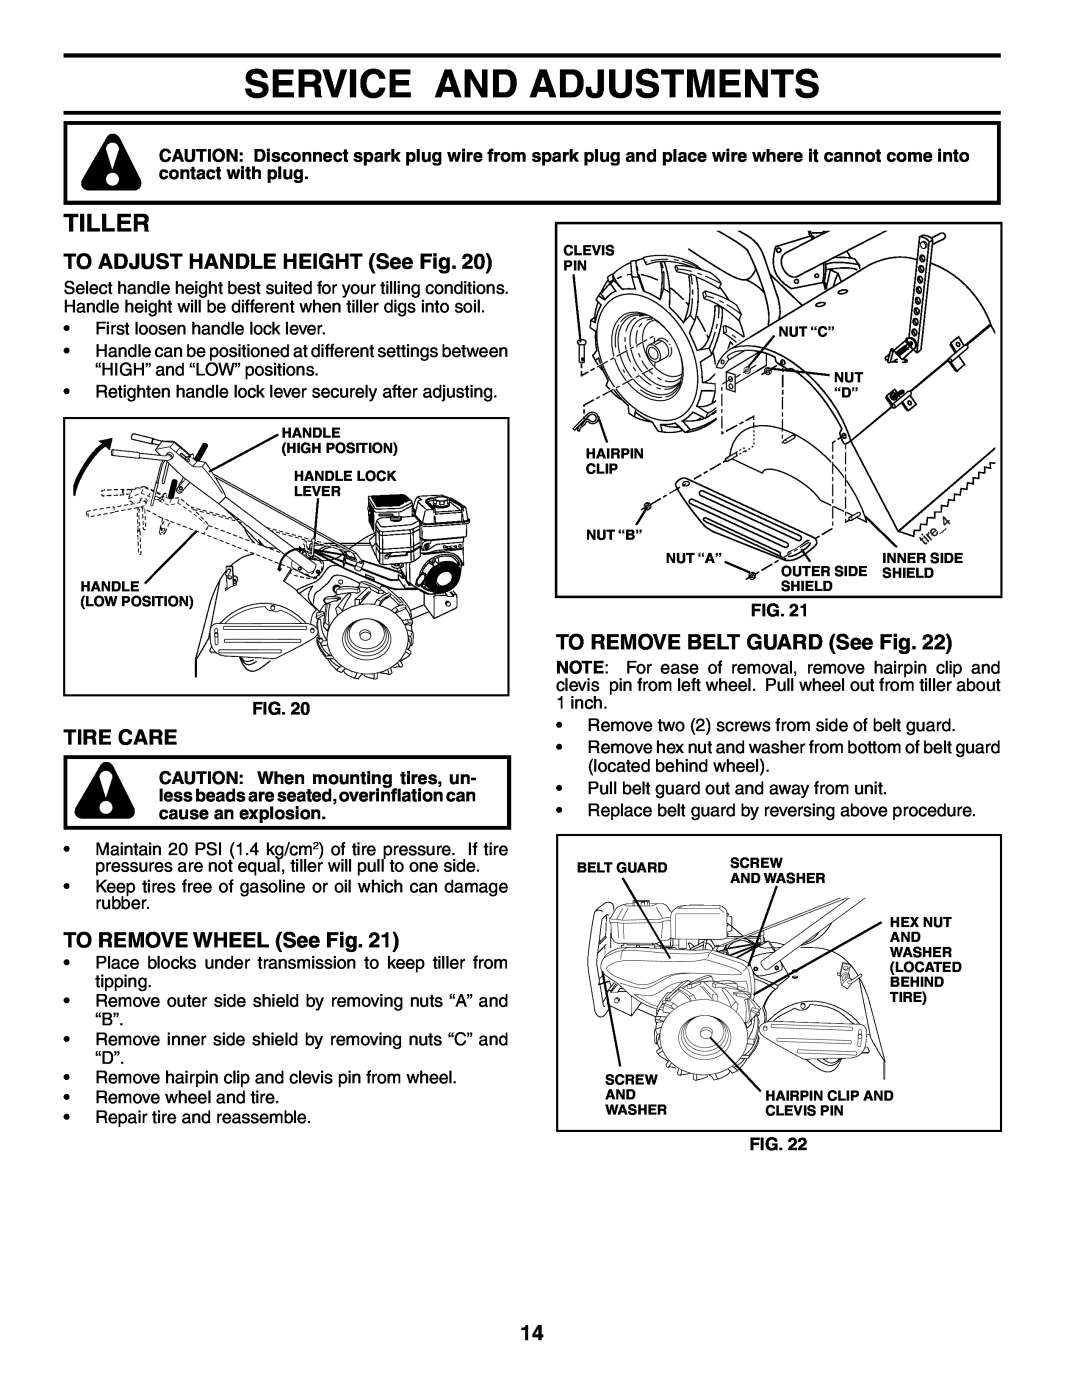 Poulan PRRT65D Service And Adjustments, Tiller, TO ADJUST HANDLE HEIGHT See Fig, Tire Care, TO REMOVE WHEEL See Fig 